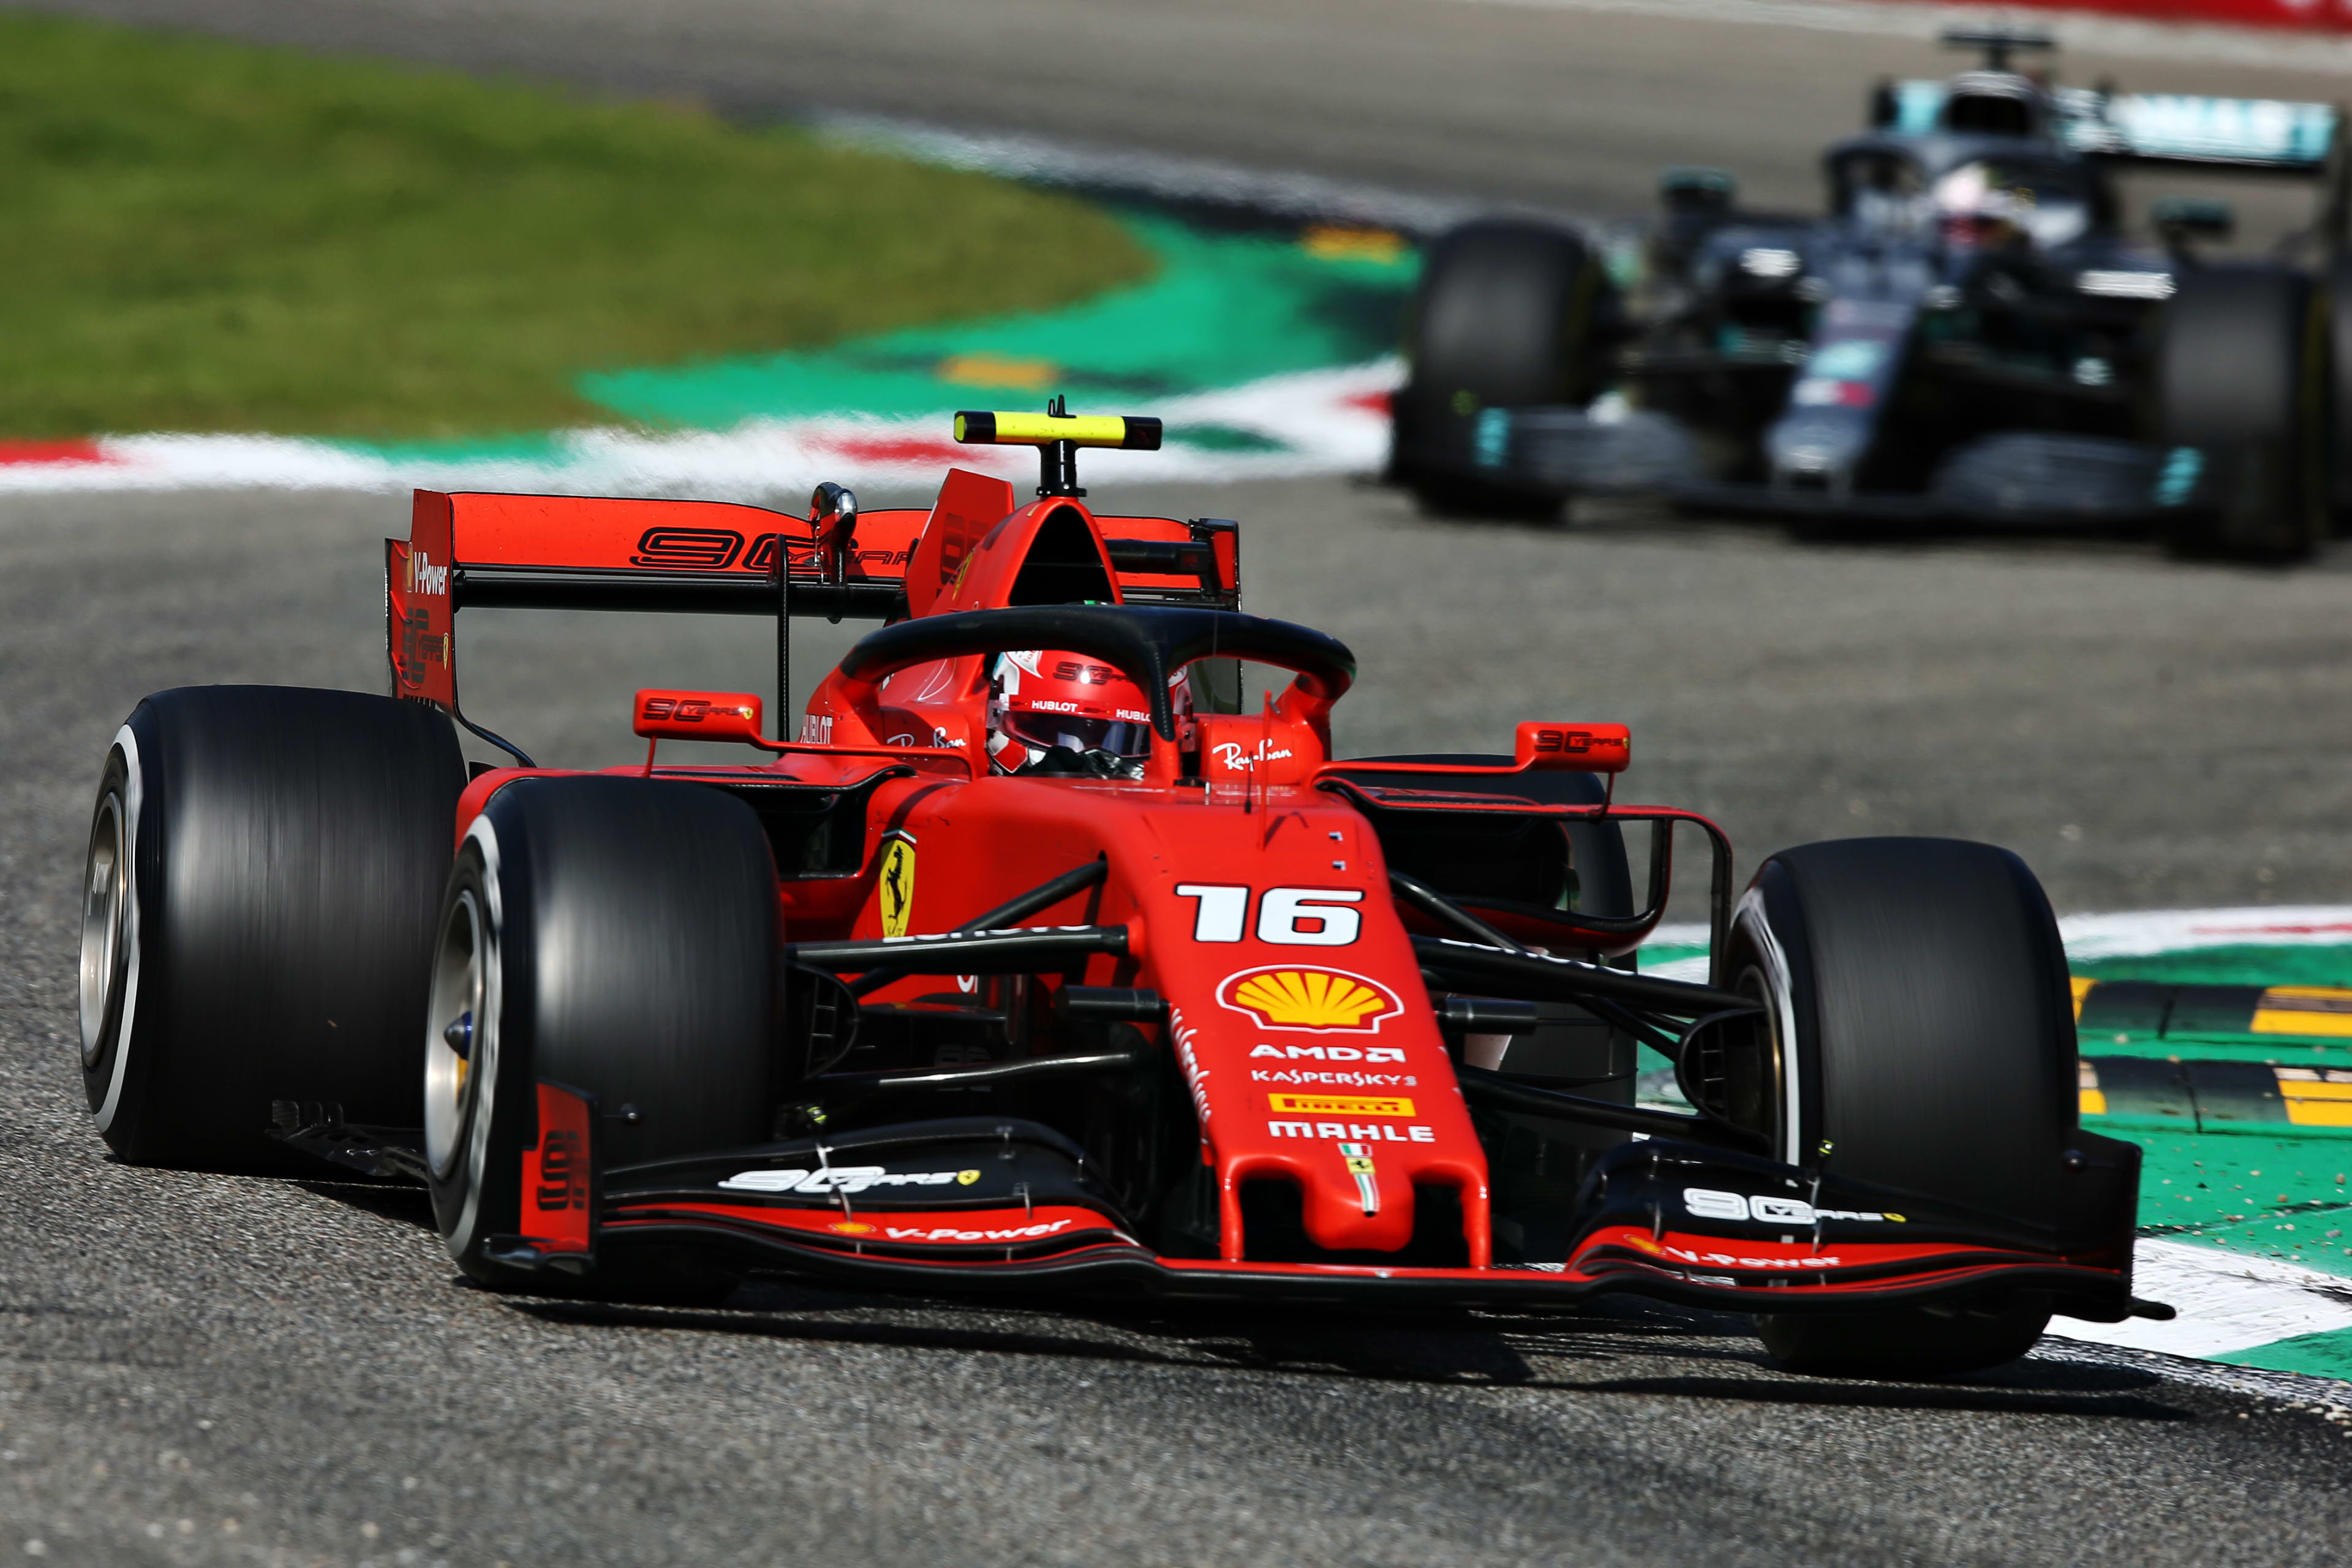 WATCH LIVE Join our stream of the 2019 Italian Grand Prix Formula 1®